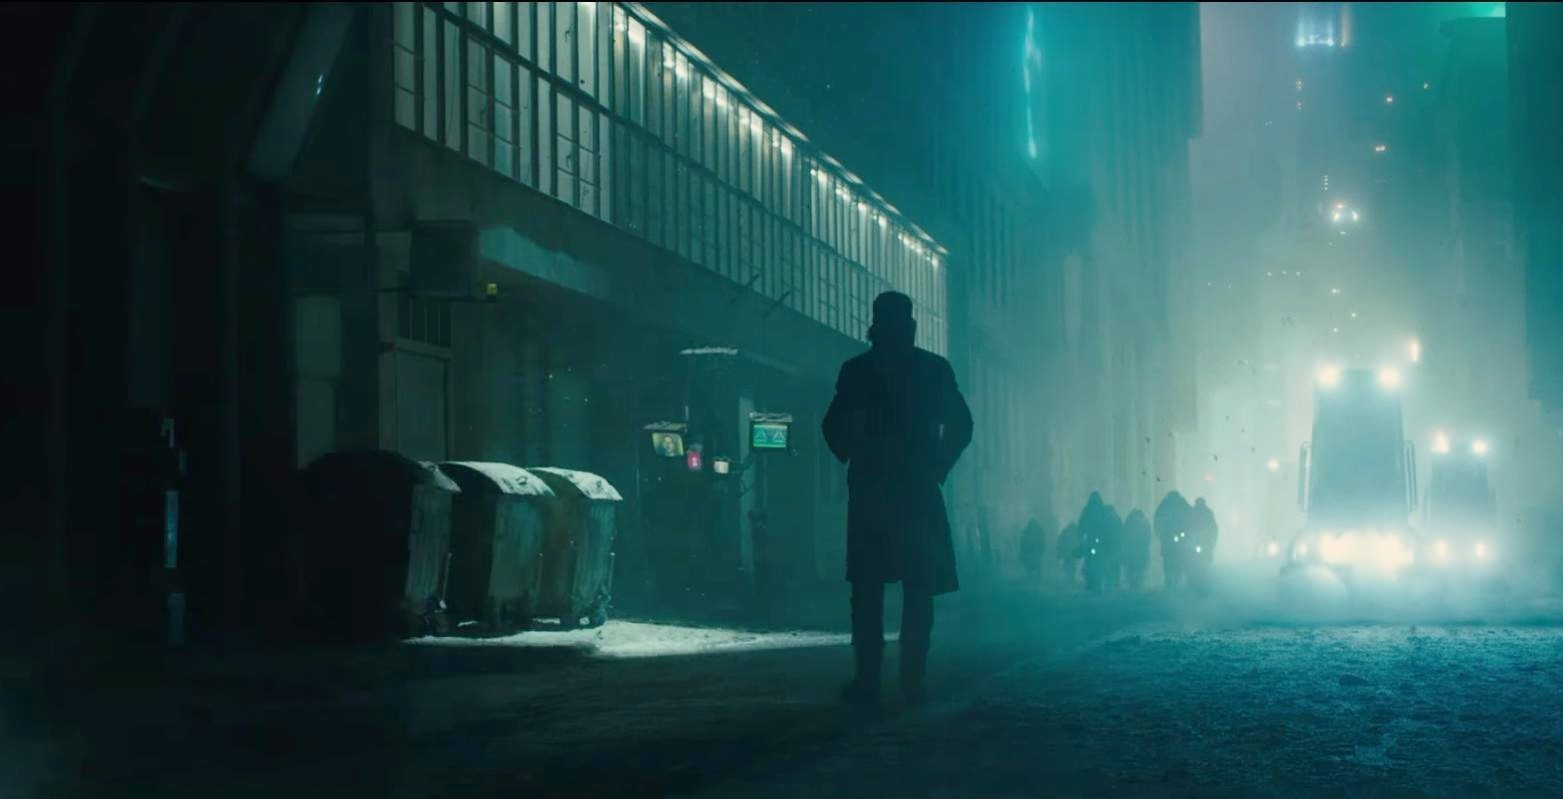 A scene from Warner Bros. Pictures' Blade Runner 2049 (2017)